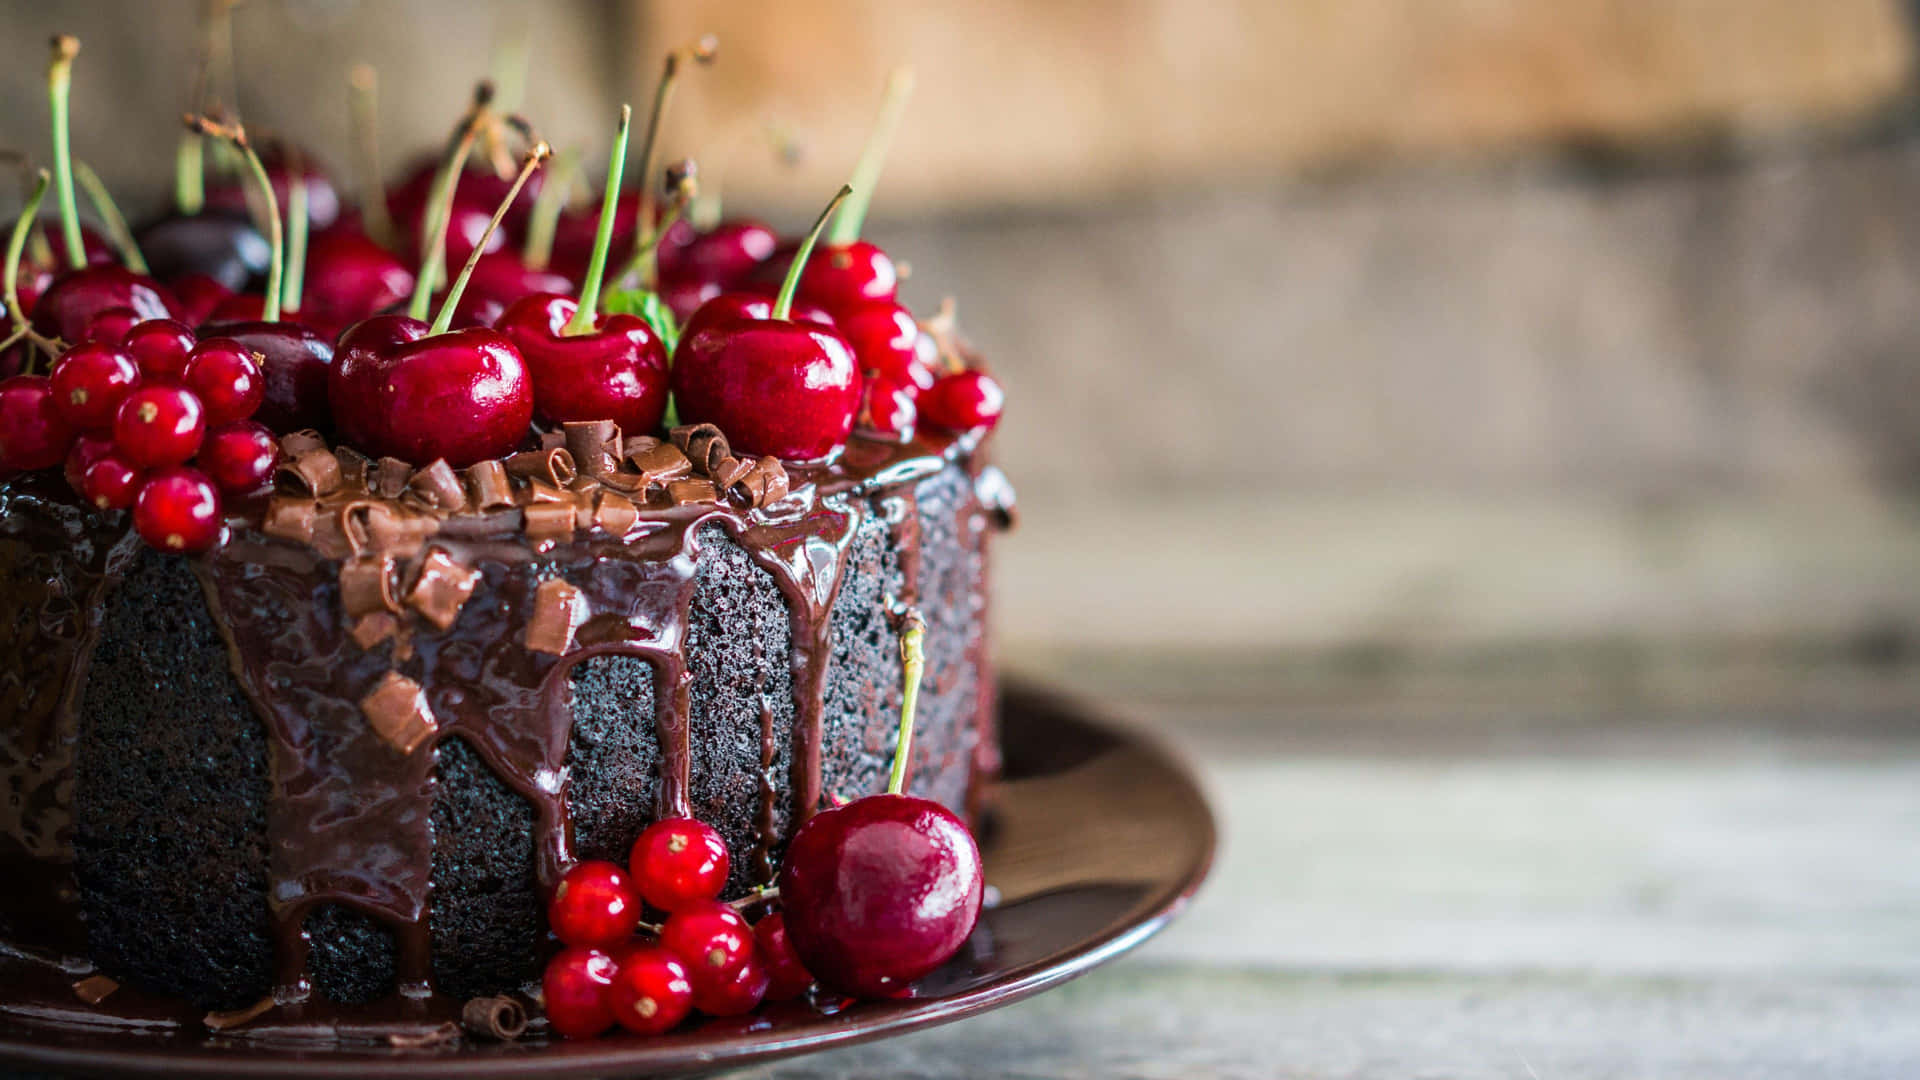 Chocolate Cake With Cherries On Top